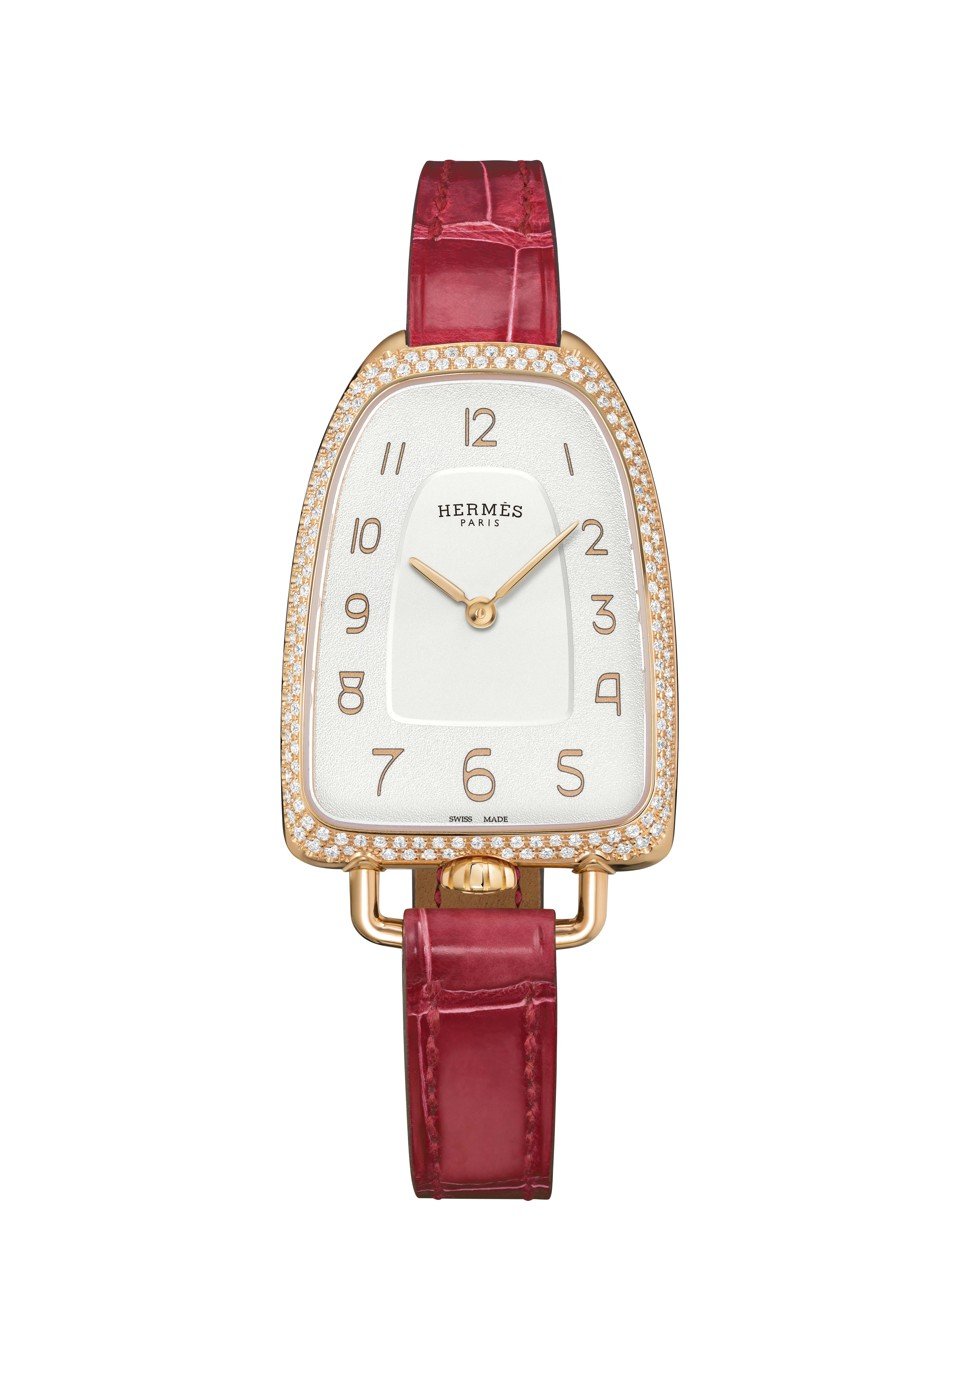 Galop d’Hermès watch with diamond bezel and red leather strap